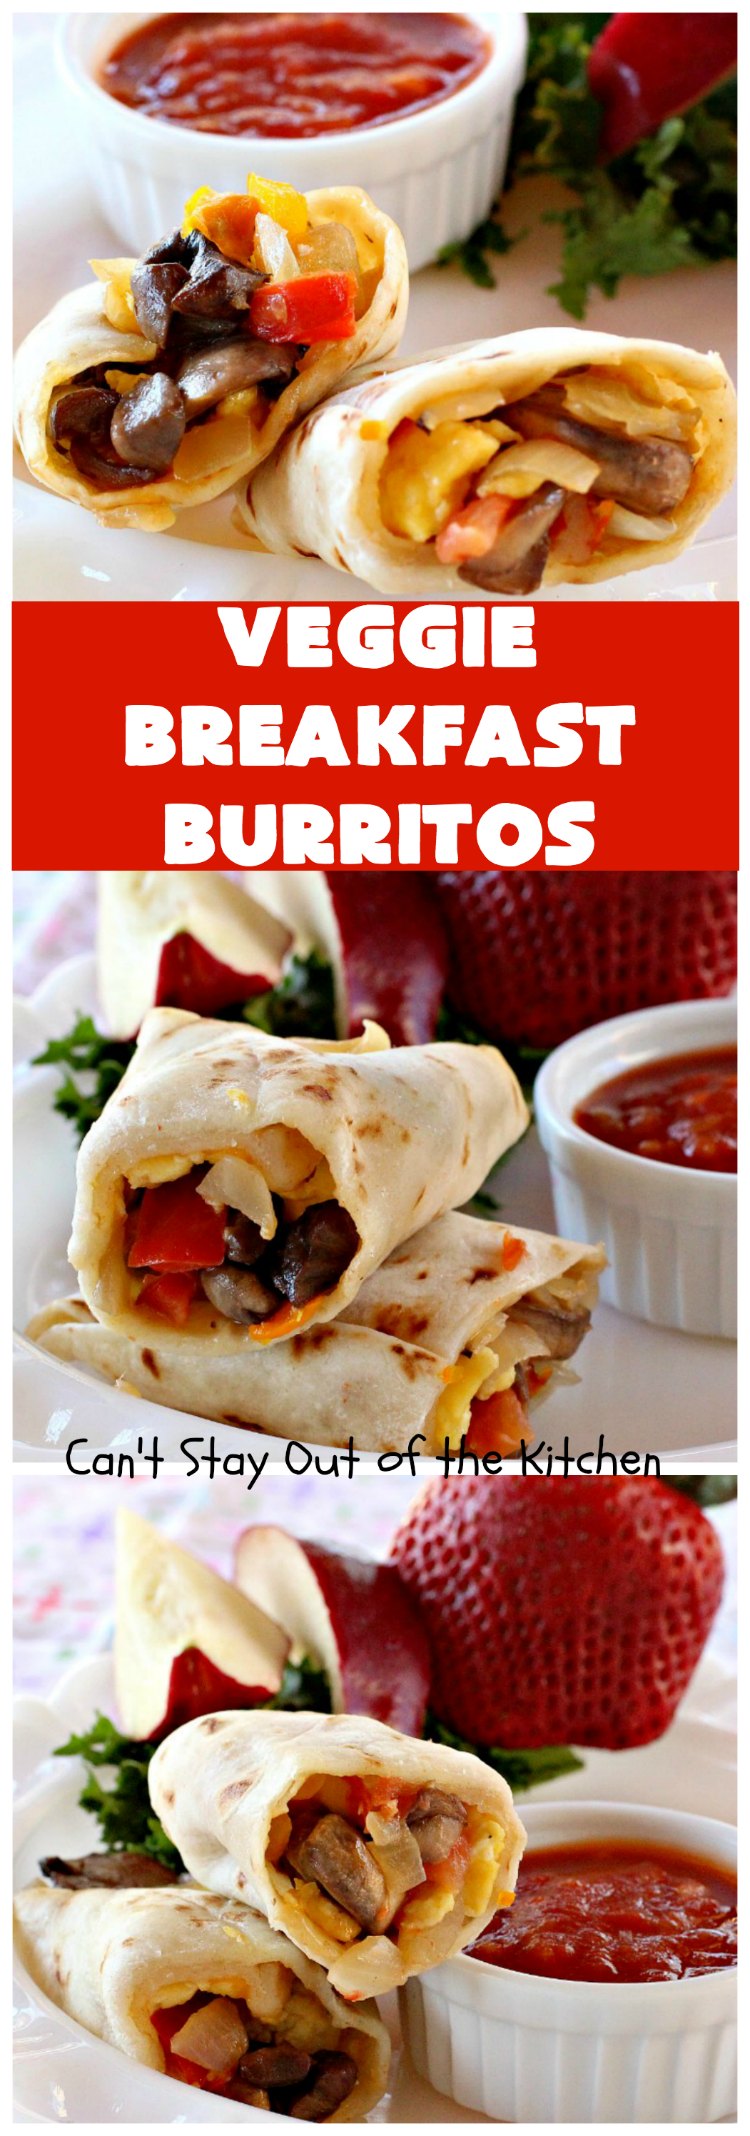 Veggie Breakfast Burritos | Can't Stay Out of the Kitchen